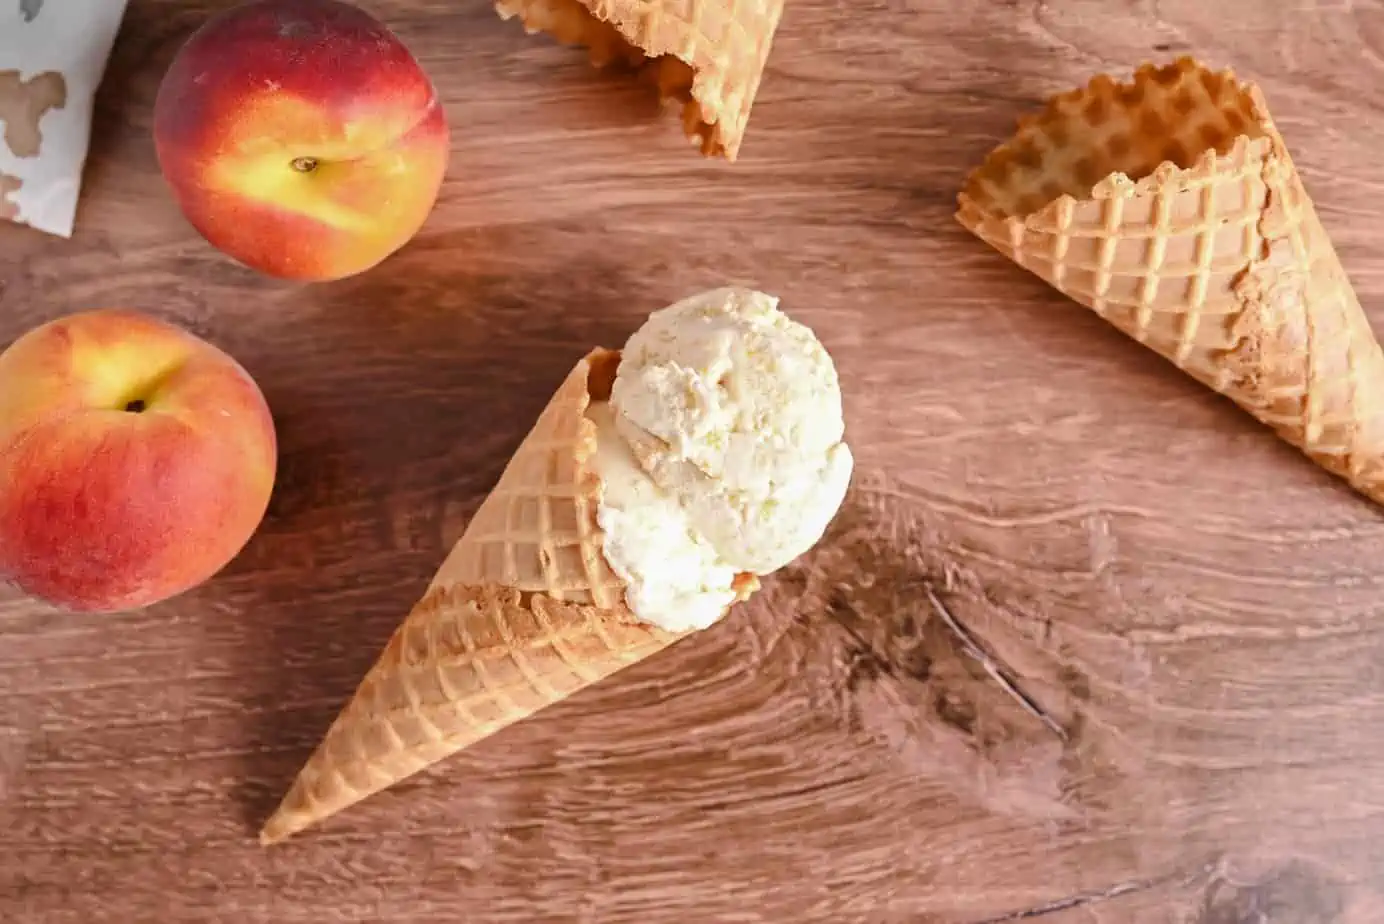 Waffle cone holding peach ice cream laying on a wooden countertop next to peaches and empty waffle cones.